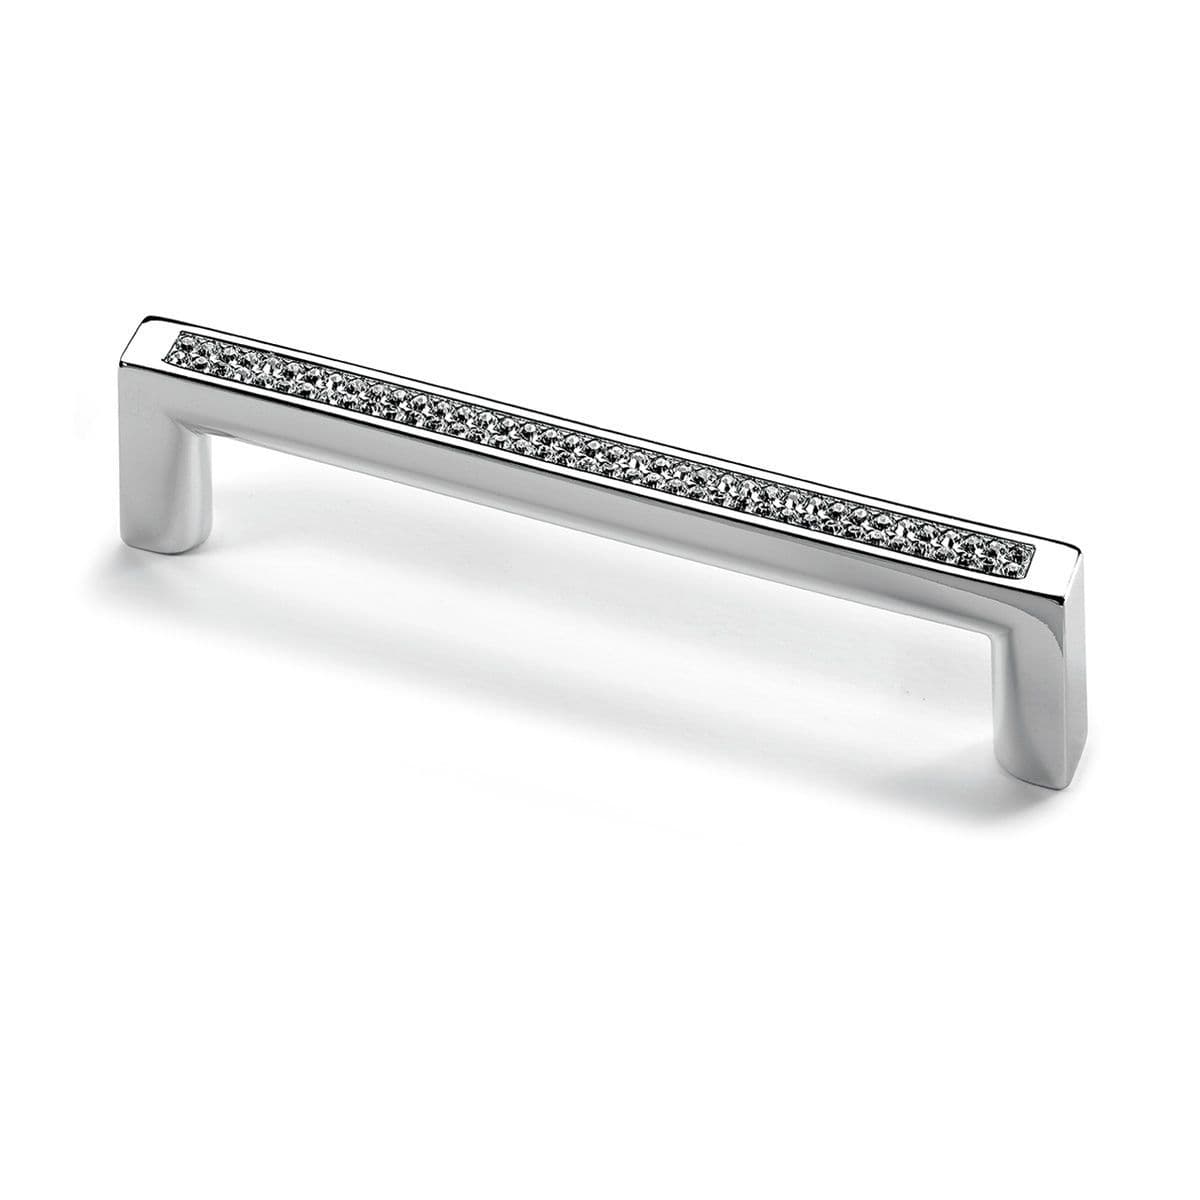 SATURNIA D Cupboard Handle - 128mm h/c size - BRIGHT CHOME PLATED (HETTICH - Deluxe)